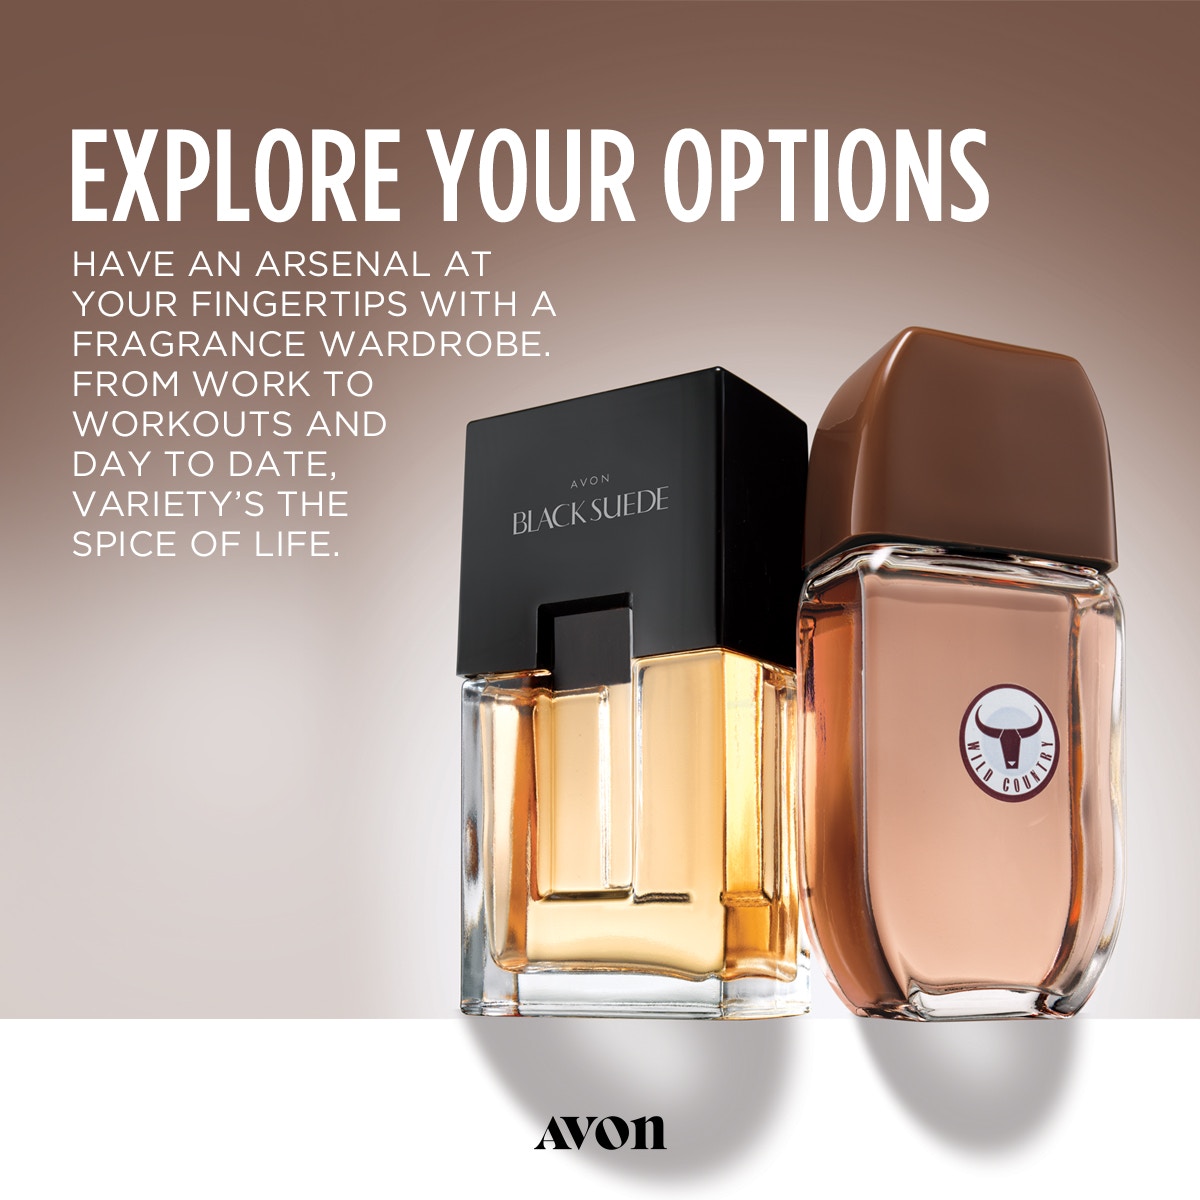 #Explore your options: 
Our #BlackSuede & #WildCountry #Collection is effortlessly cool. Go ahead, show your smooth side. Shop: go.youravon.com/3jhccp

#giftsforhim #Avonmen